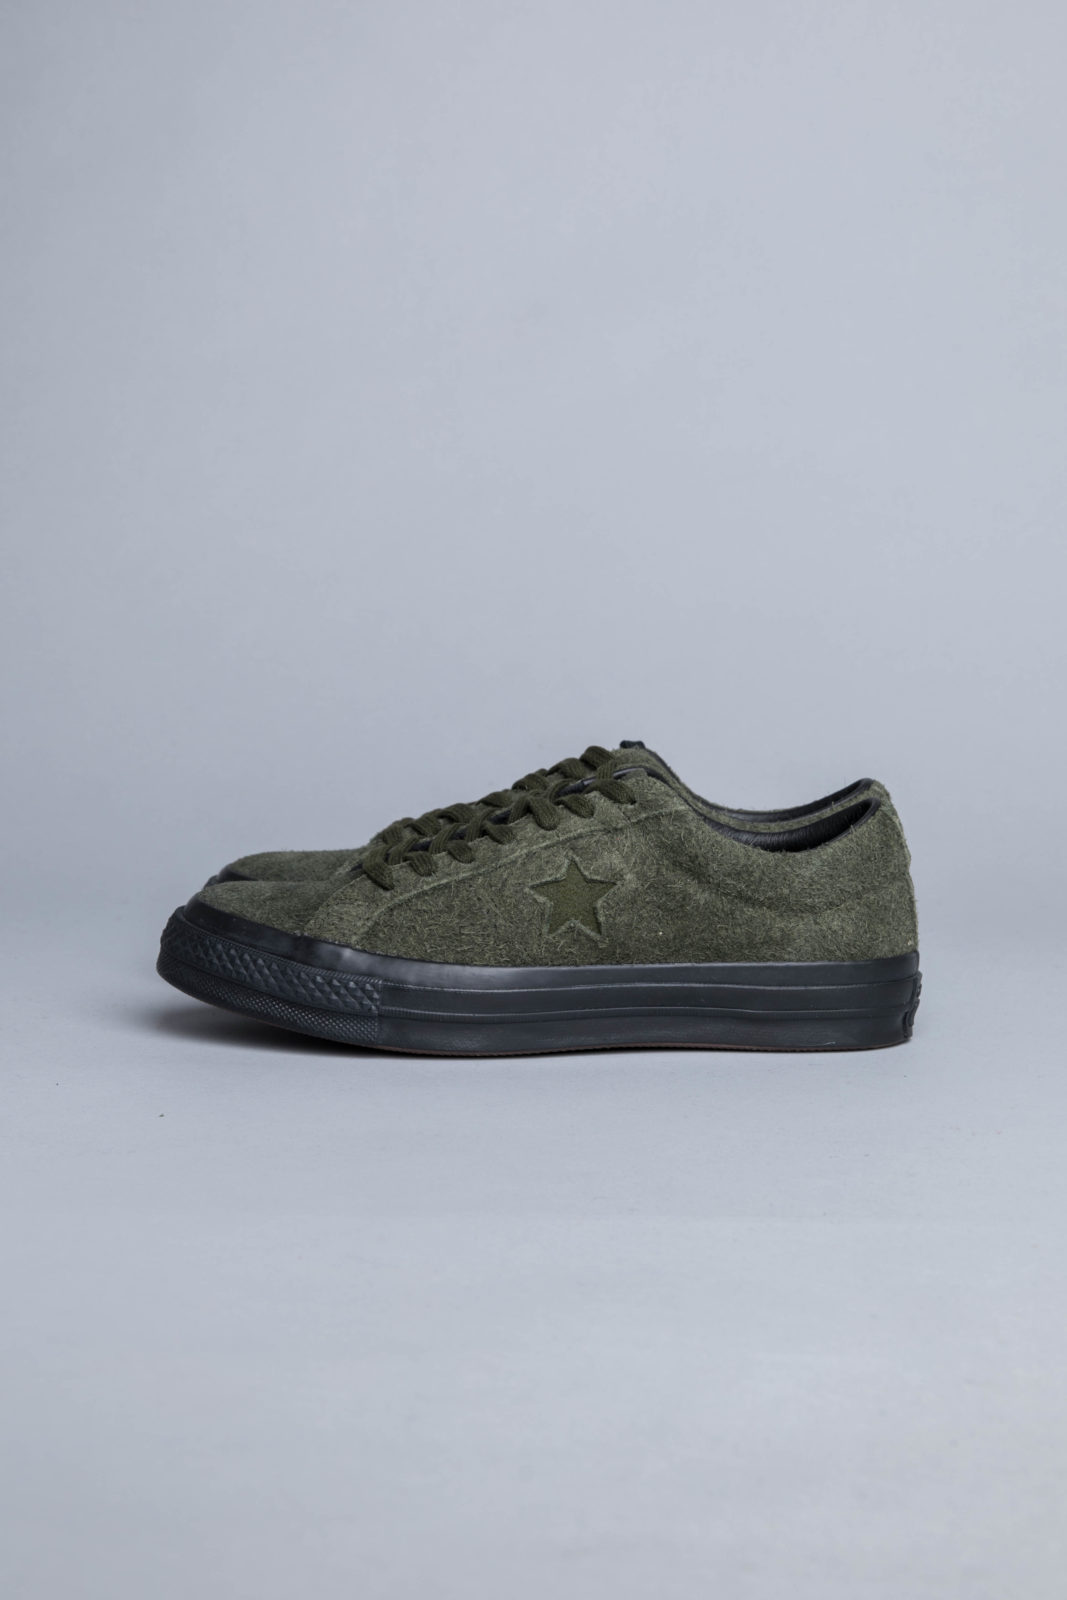 Converse One Star OX Utility Green 